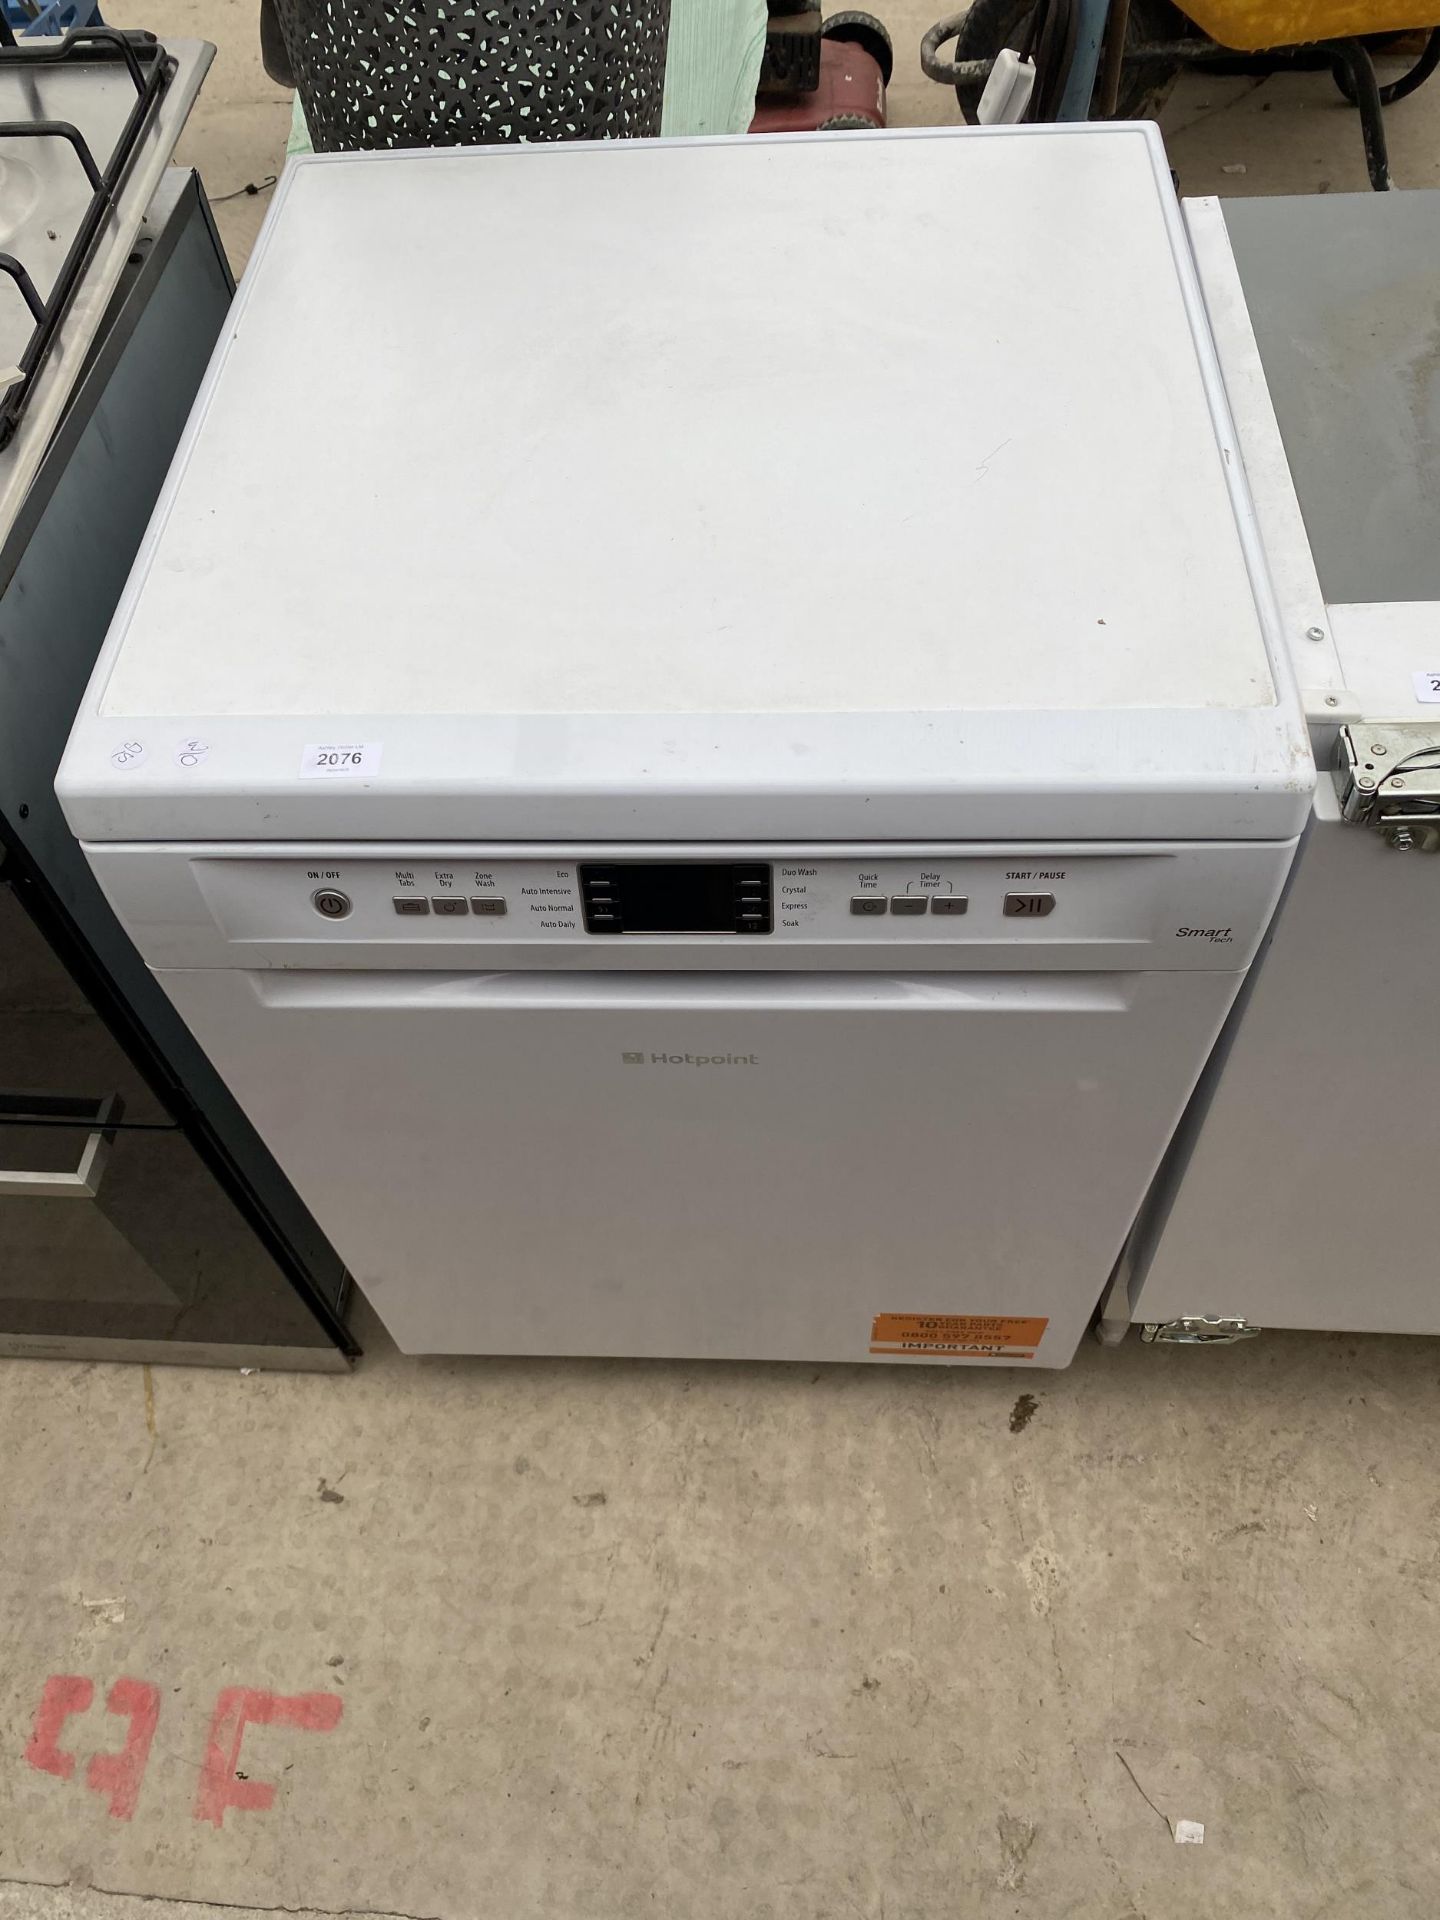 A WHITE HOTPOINT SMART TECH DISHWASHER BELIEVED IN WORKING ORDER BUT NO WARRANTY